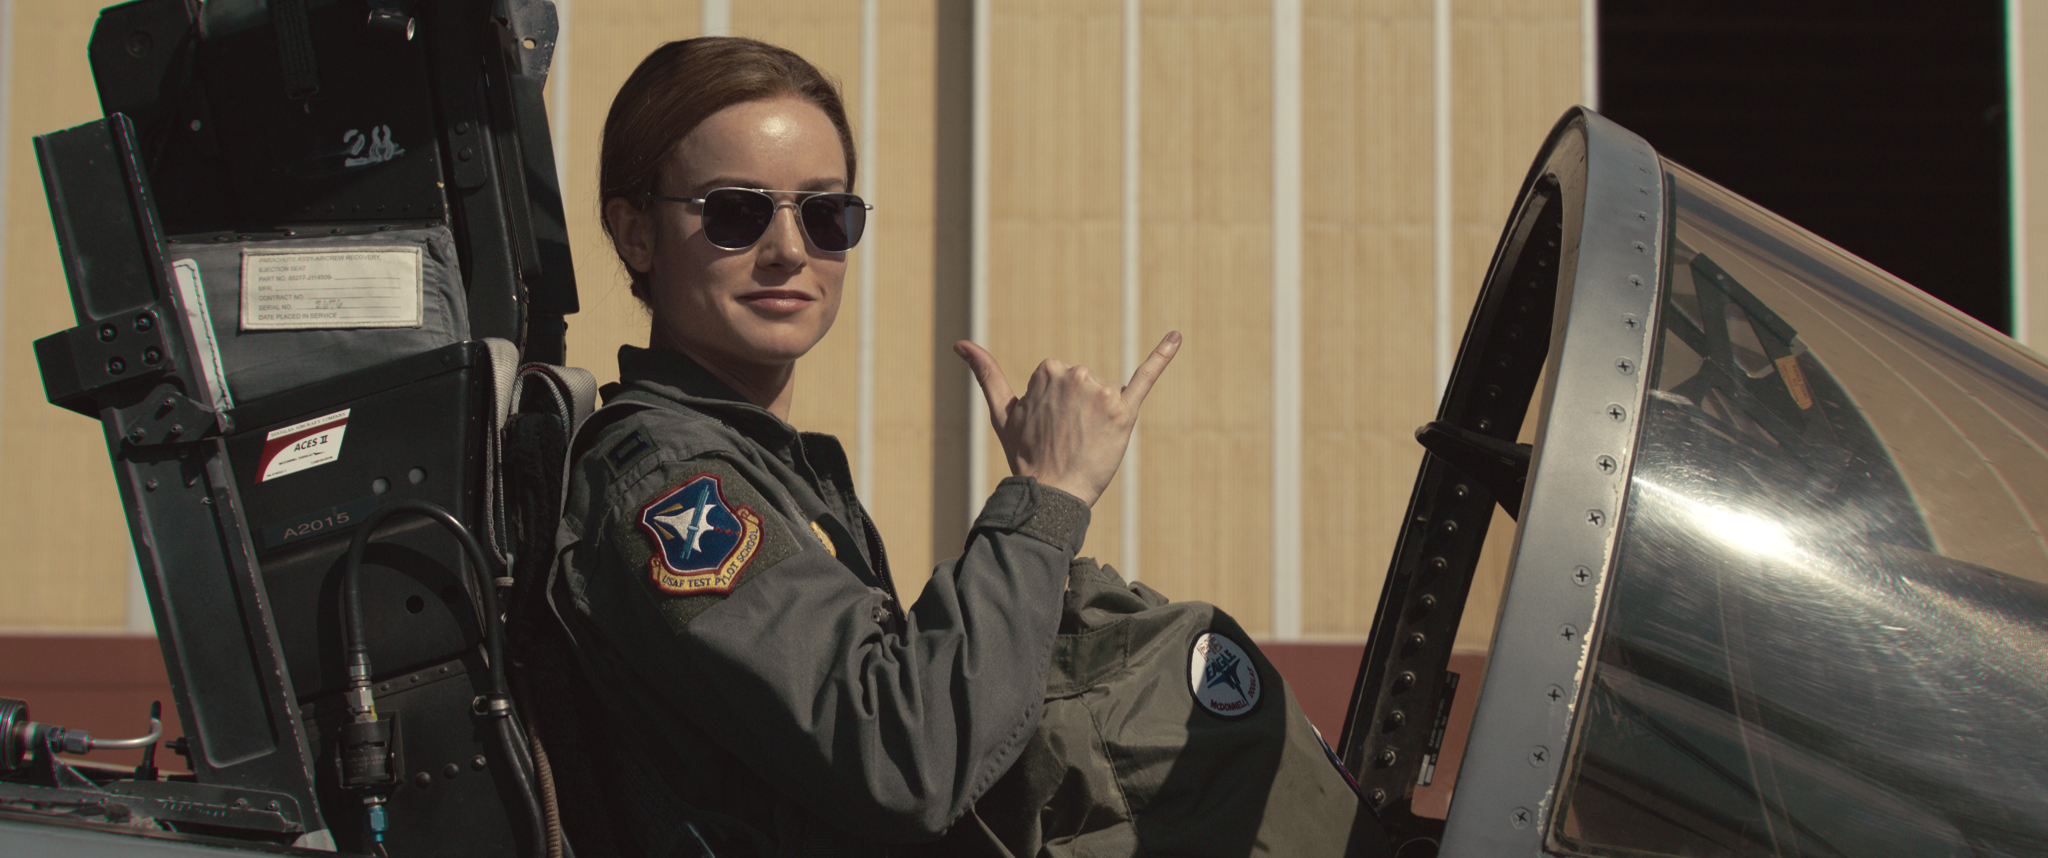 Brie Larson Invited Her Stunt Doubles From Captain Marvel To Accept Award